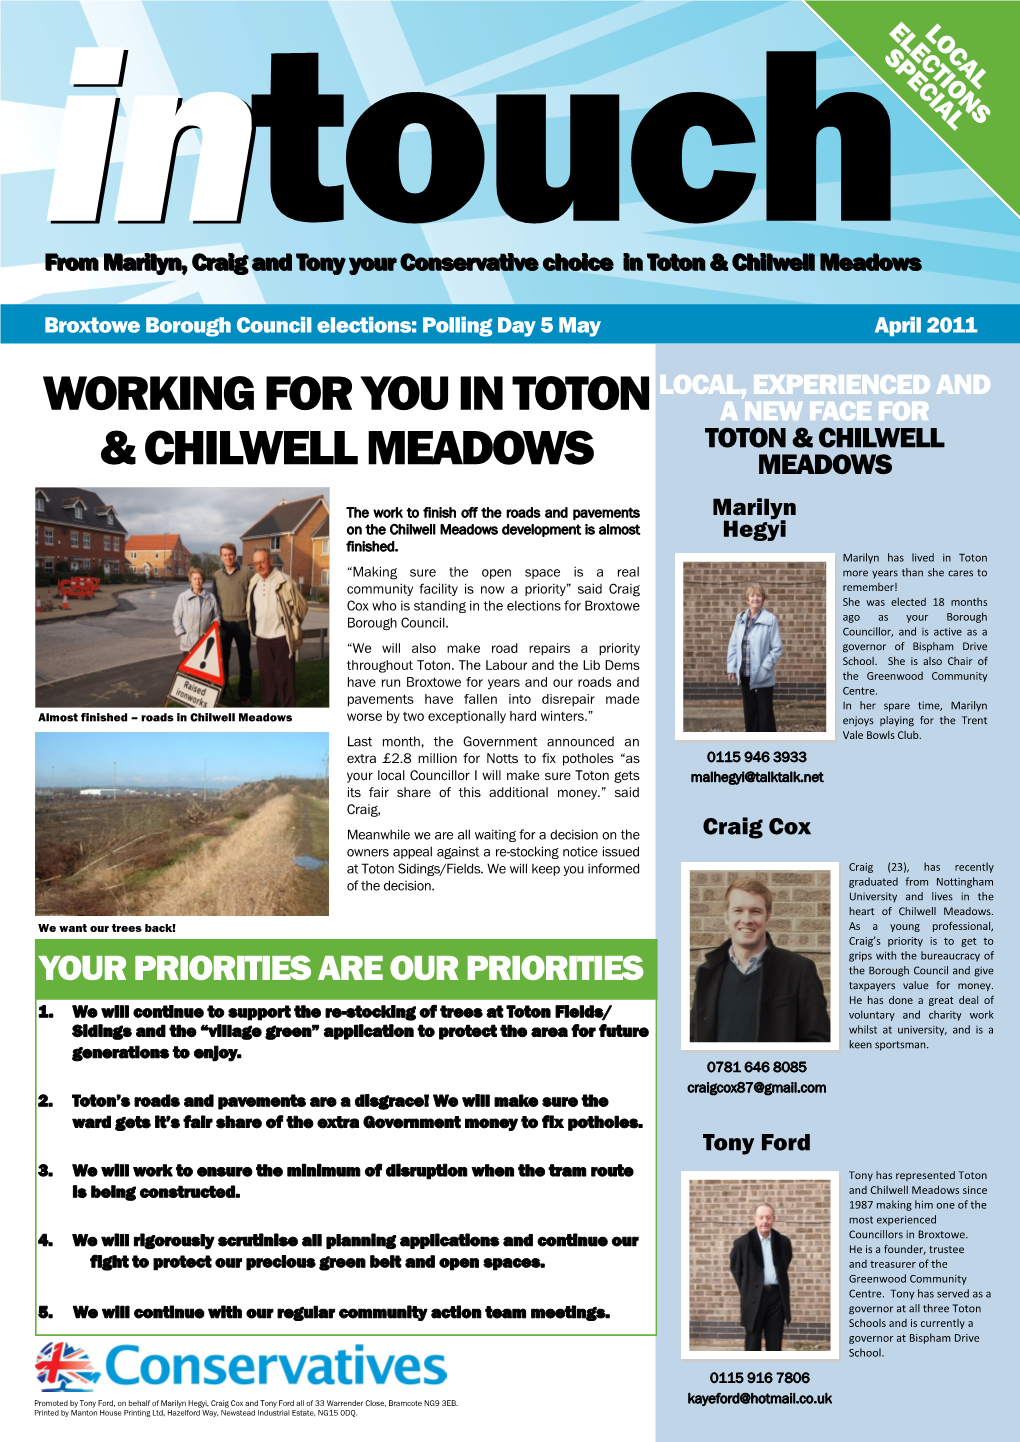 Working for You in Toton & Chilwell Meadows